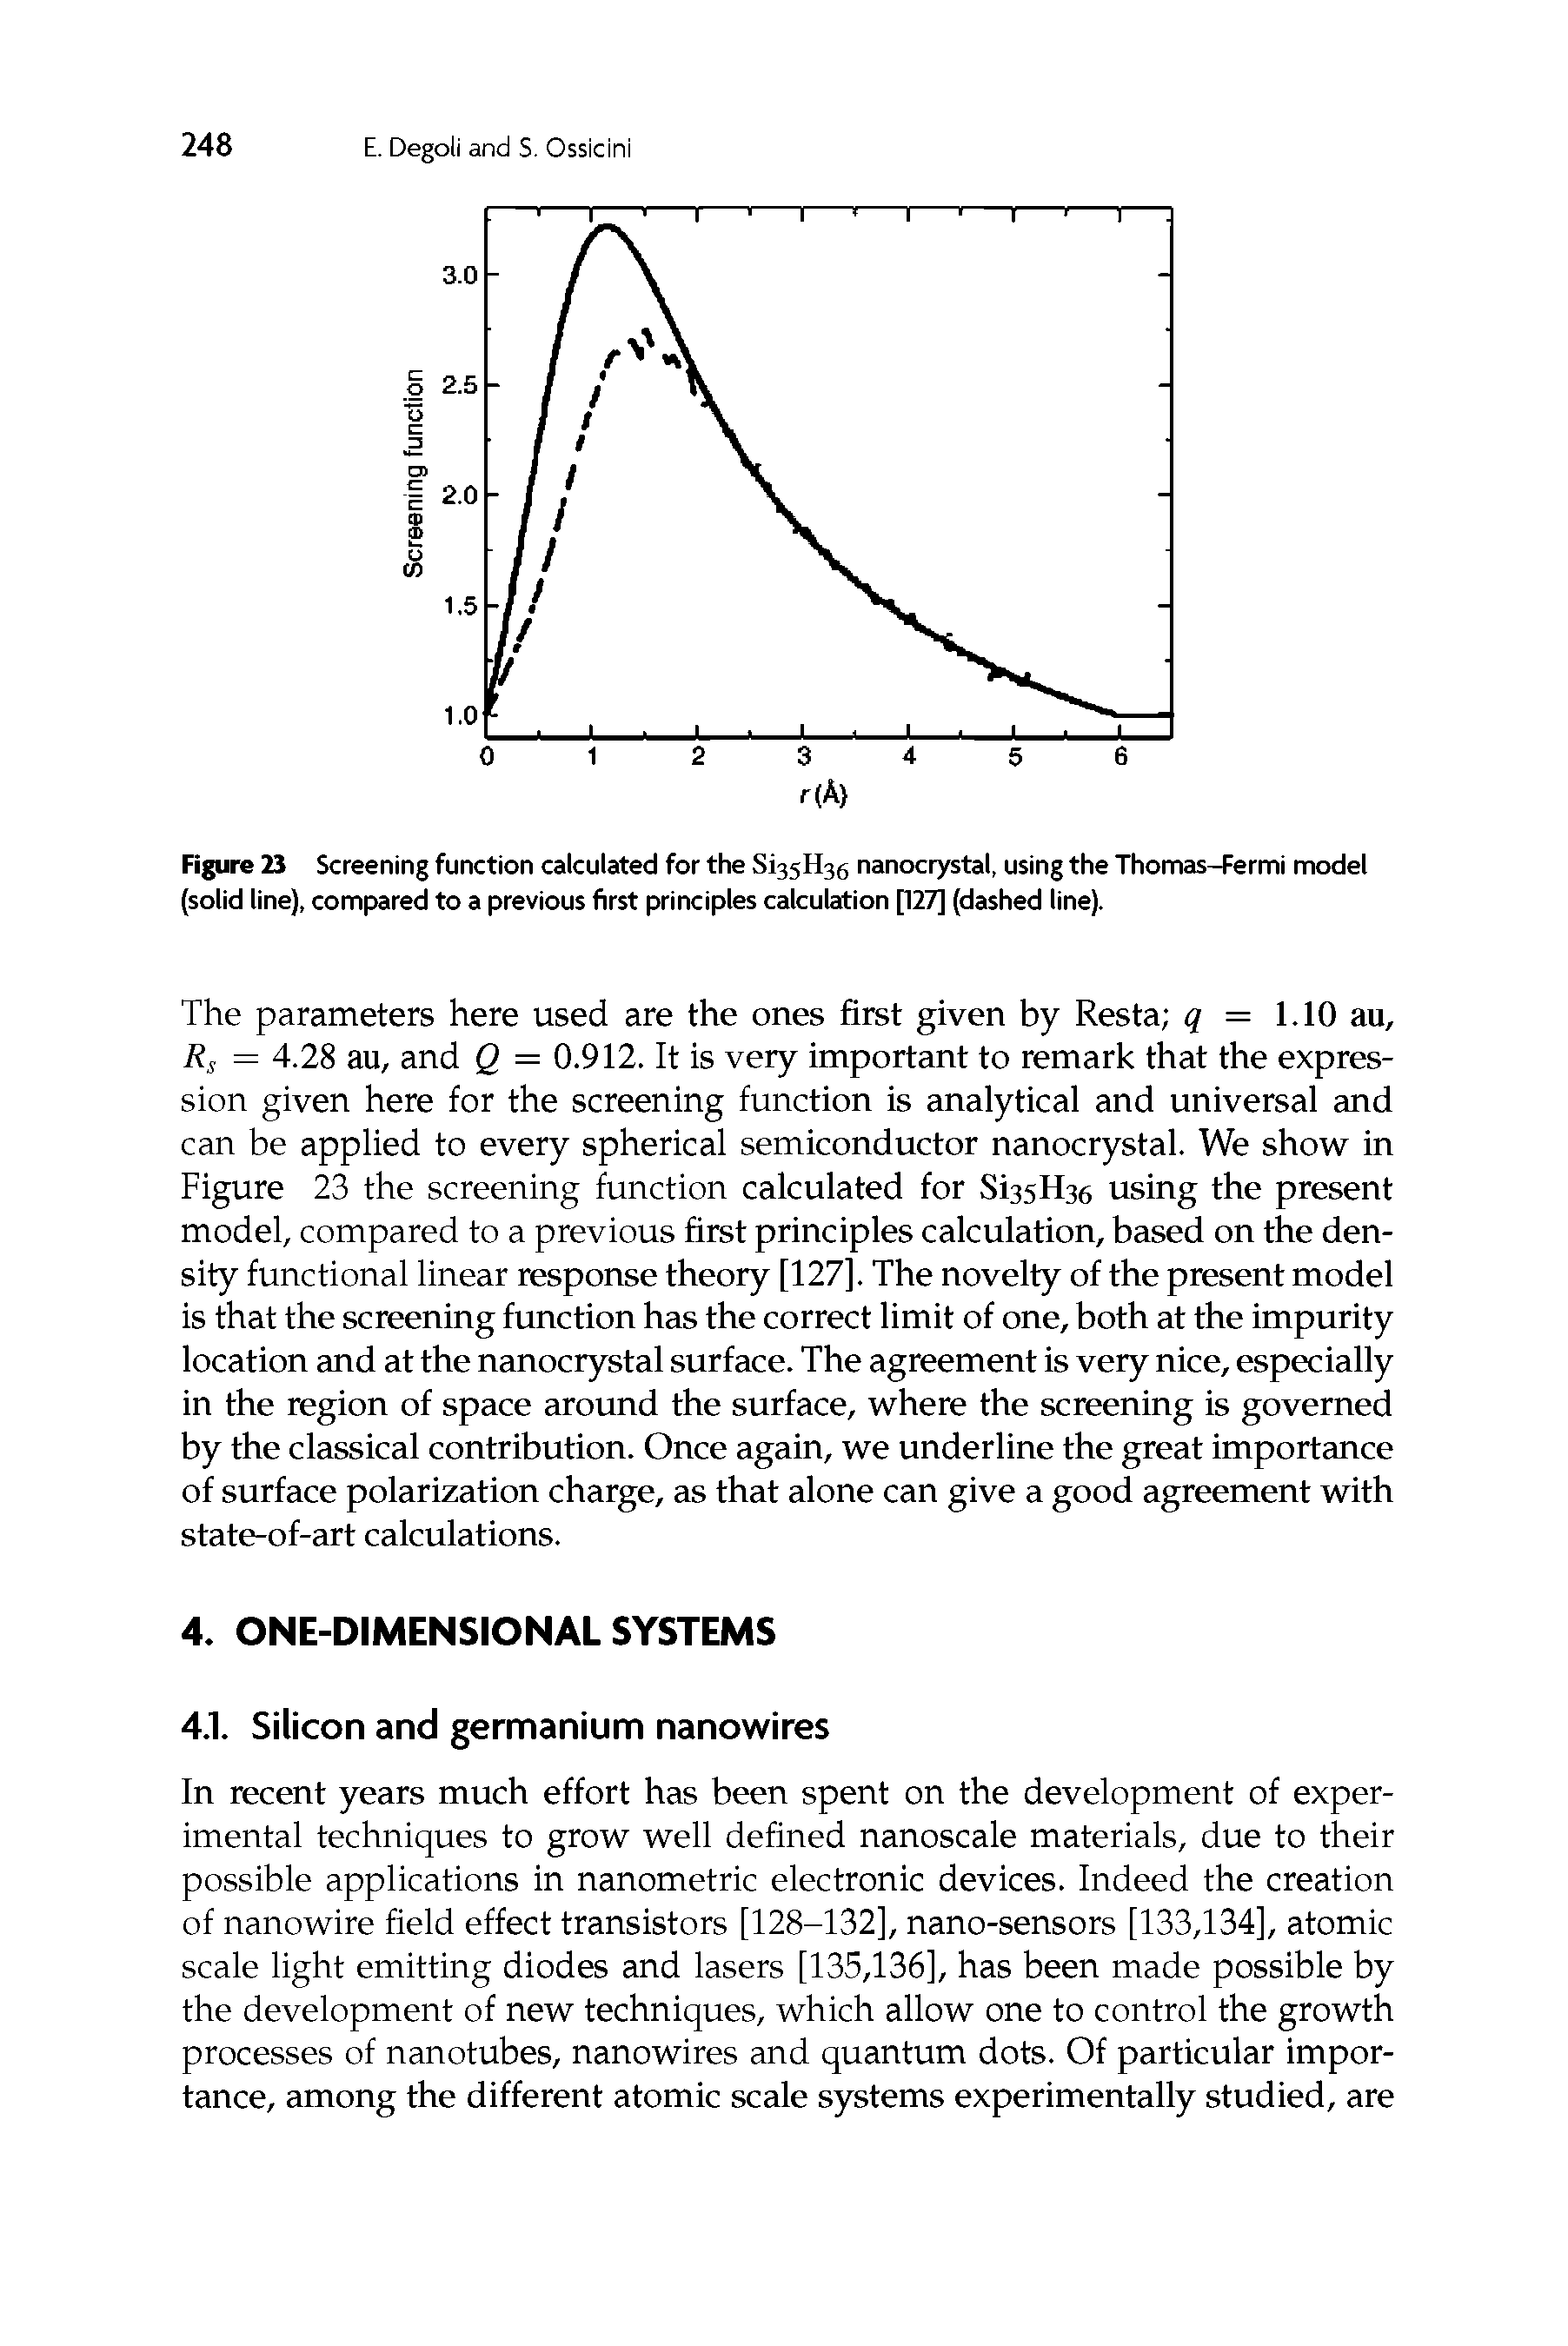 Figure 2J Screening function calculated for the S135H36 nanocrystal, using the Thomas-Fermi model (solid line), compared to a previous first principles calculation [127] (dashed line).